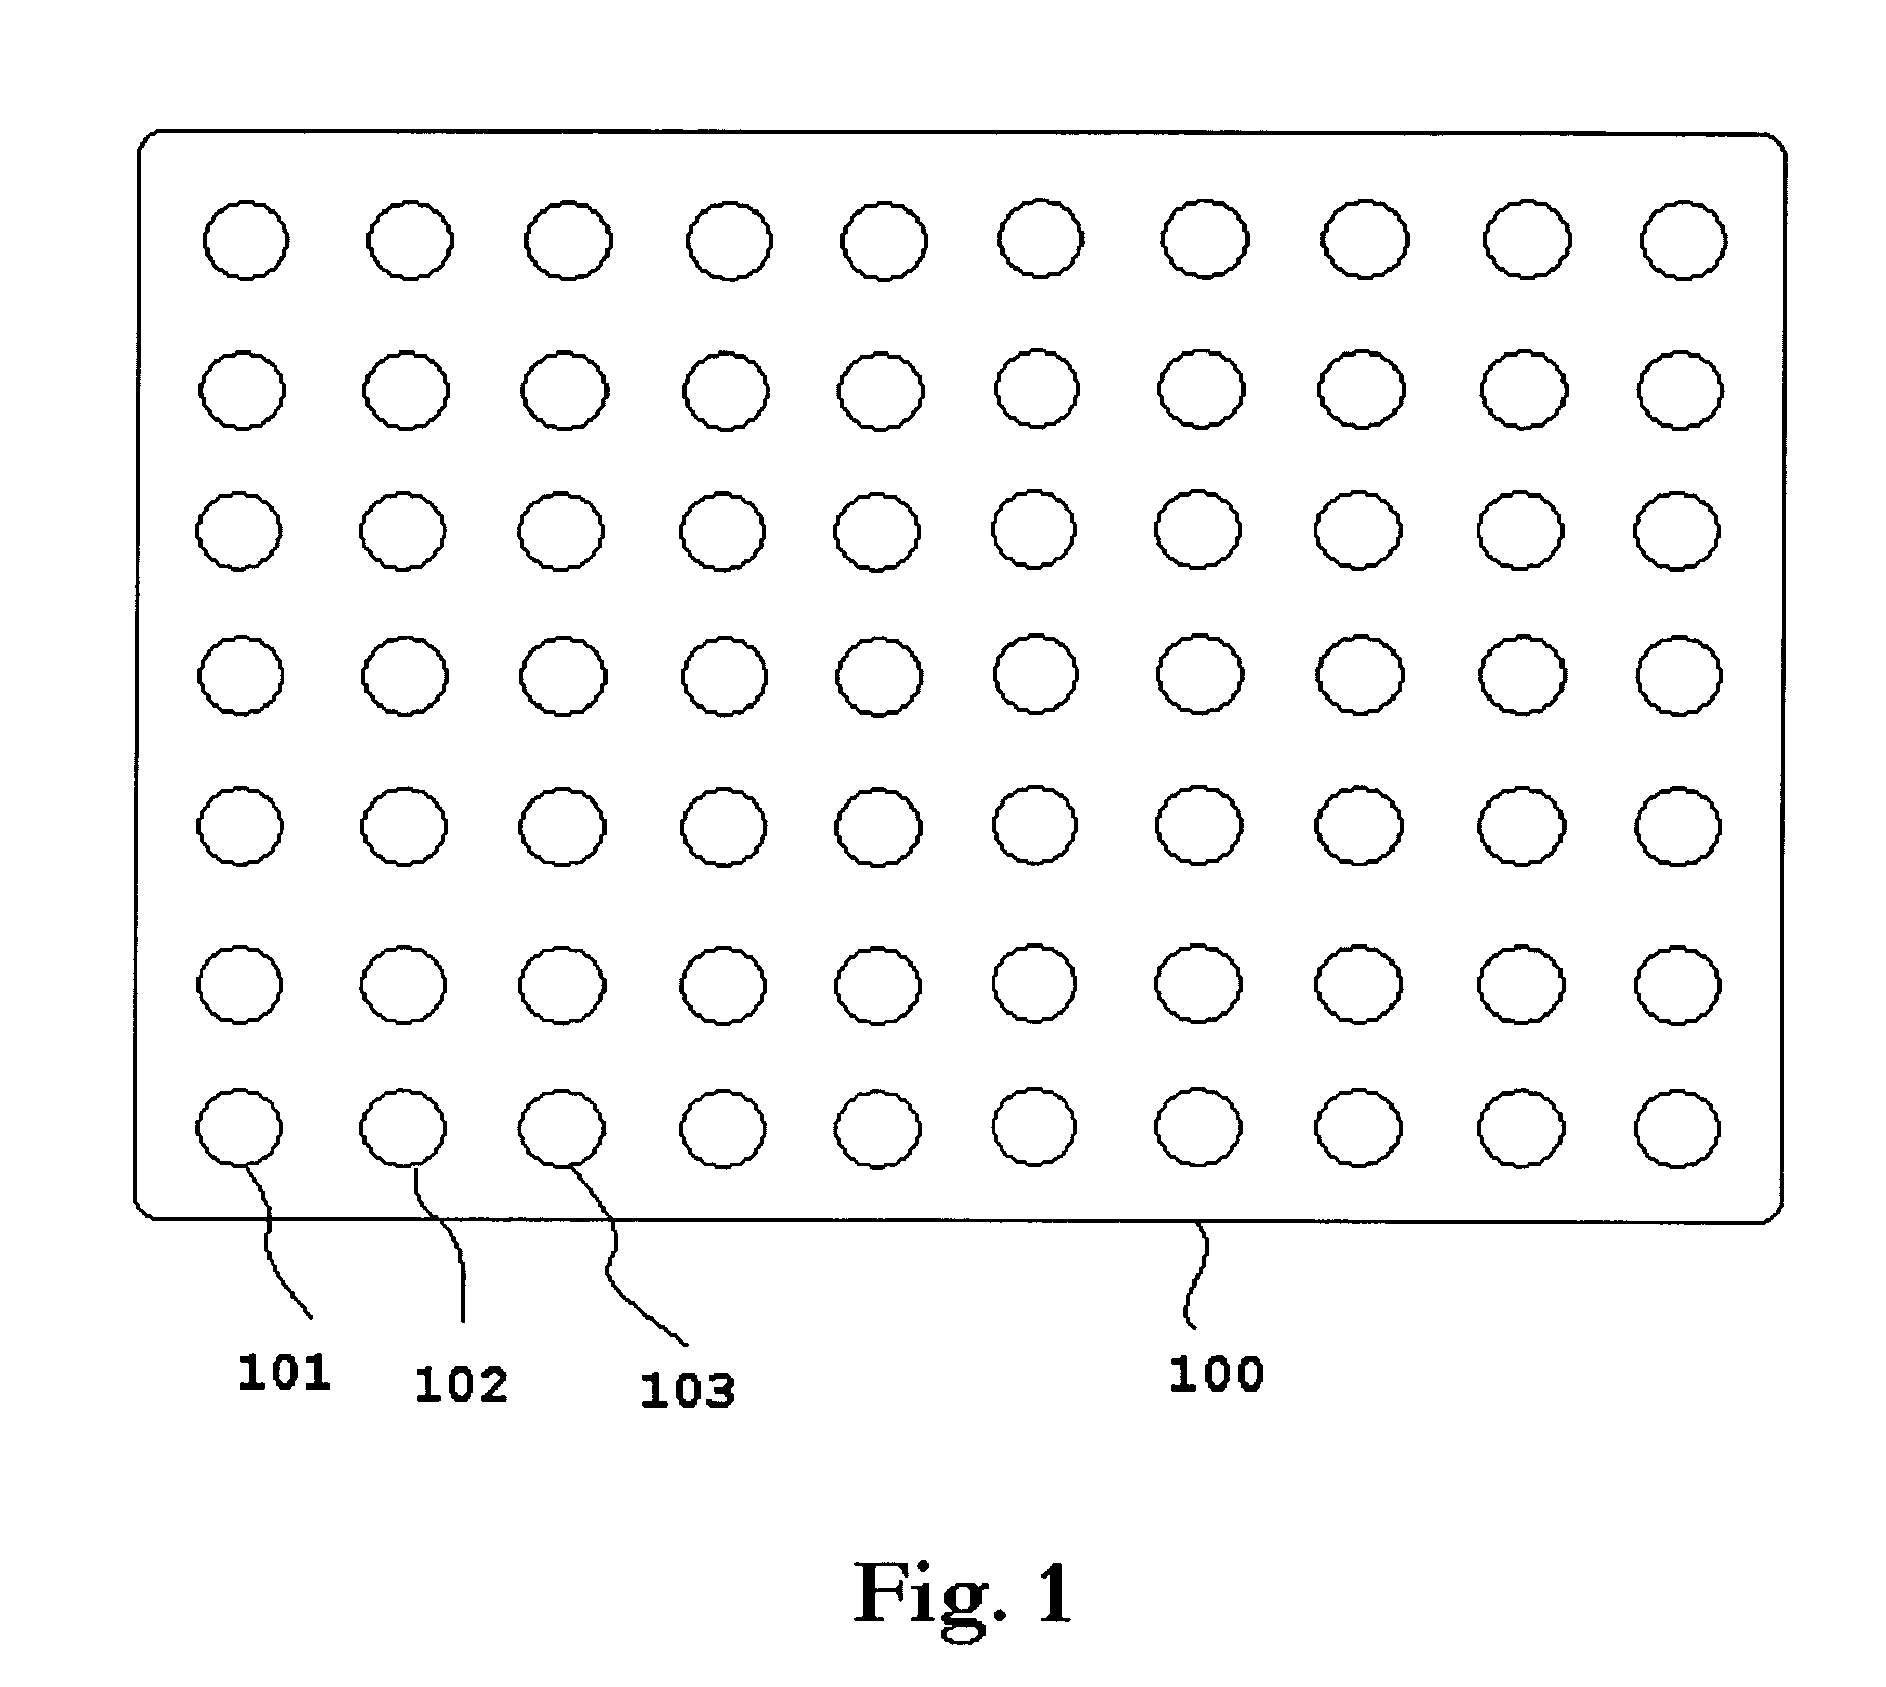 Thermal compressive aerating bandage and methods of use relating to same